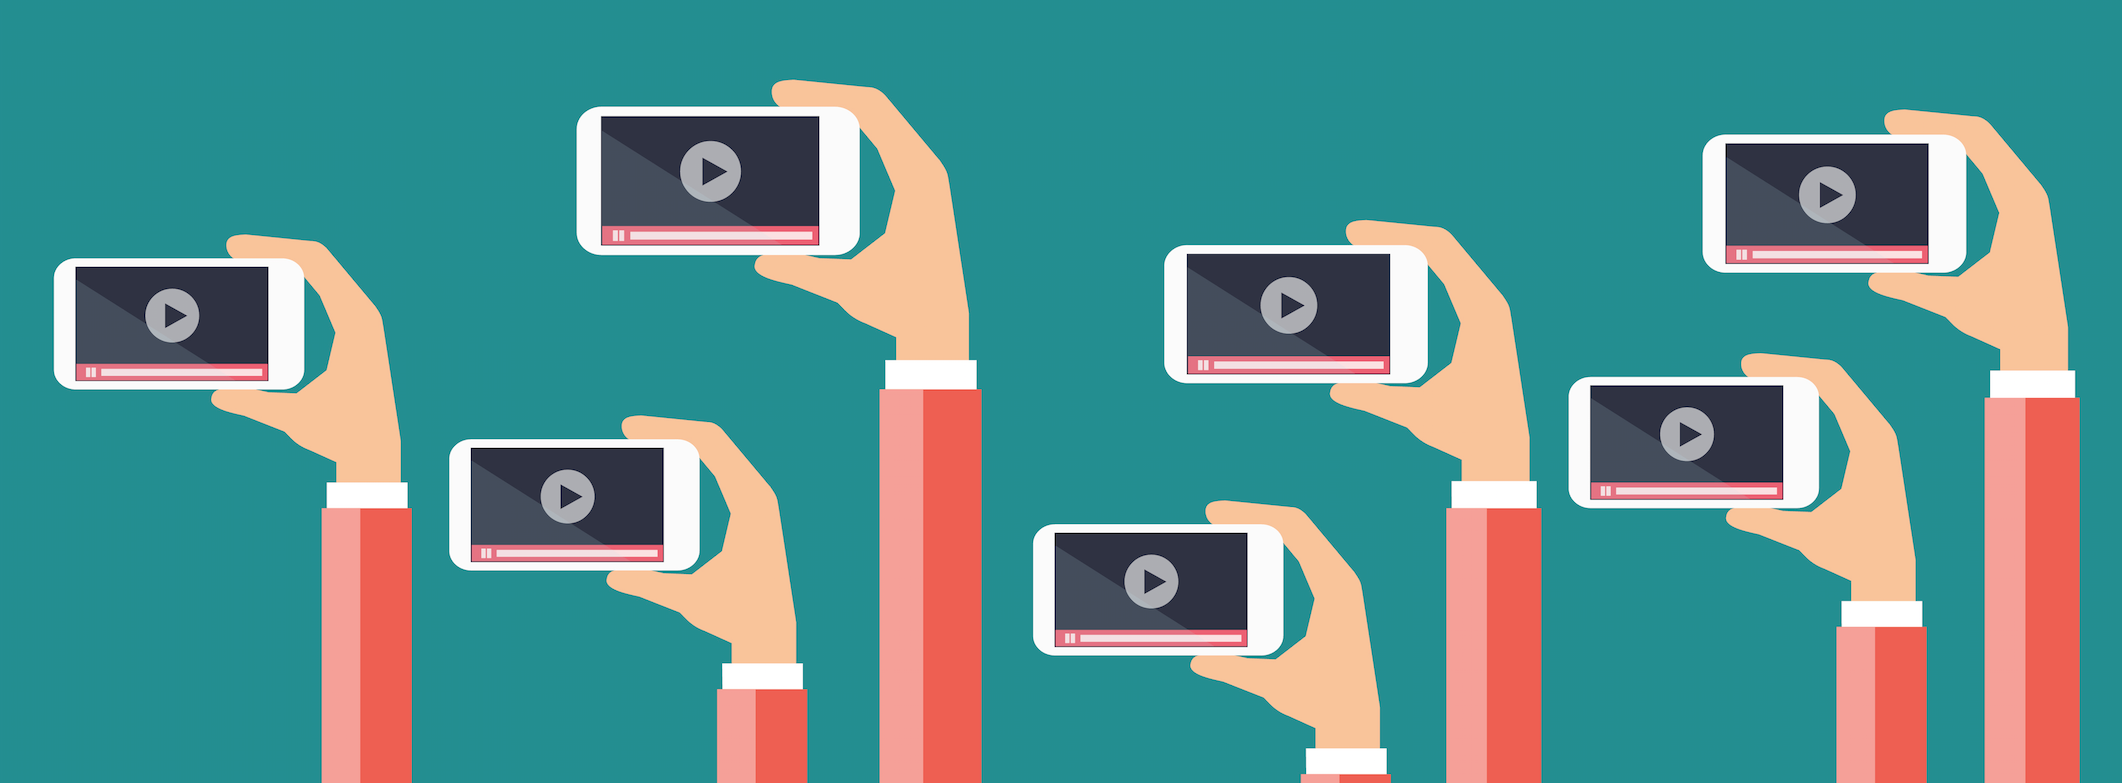 Video Marketing Series Prioritizing on a Shoestring Budget